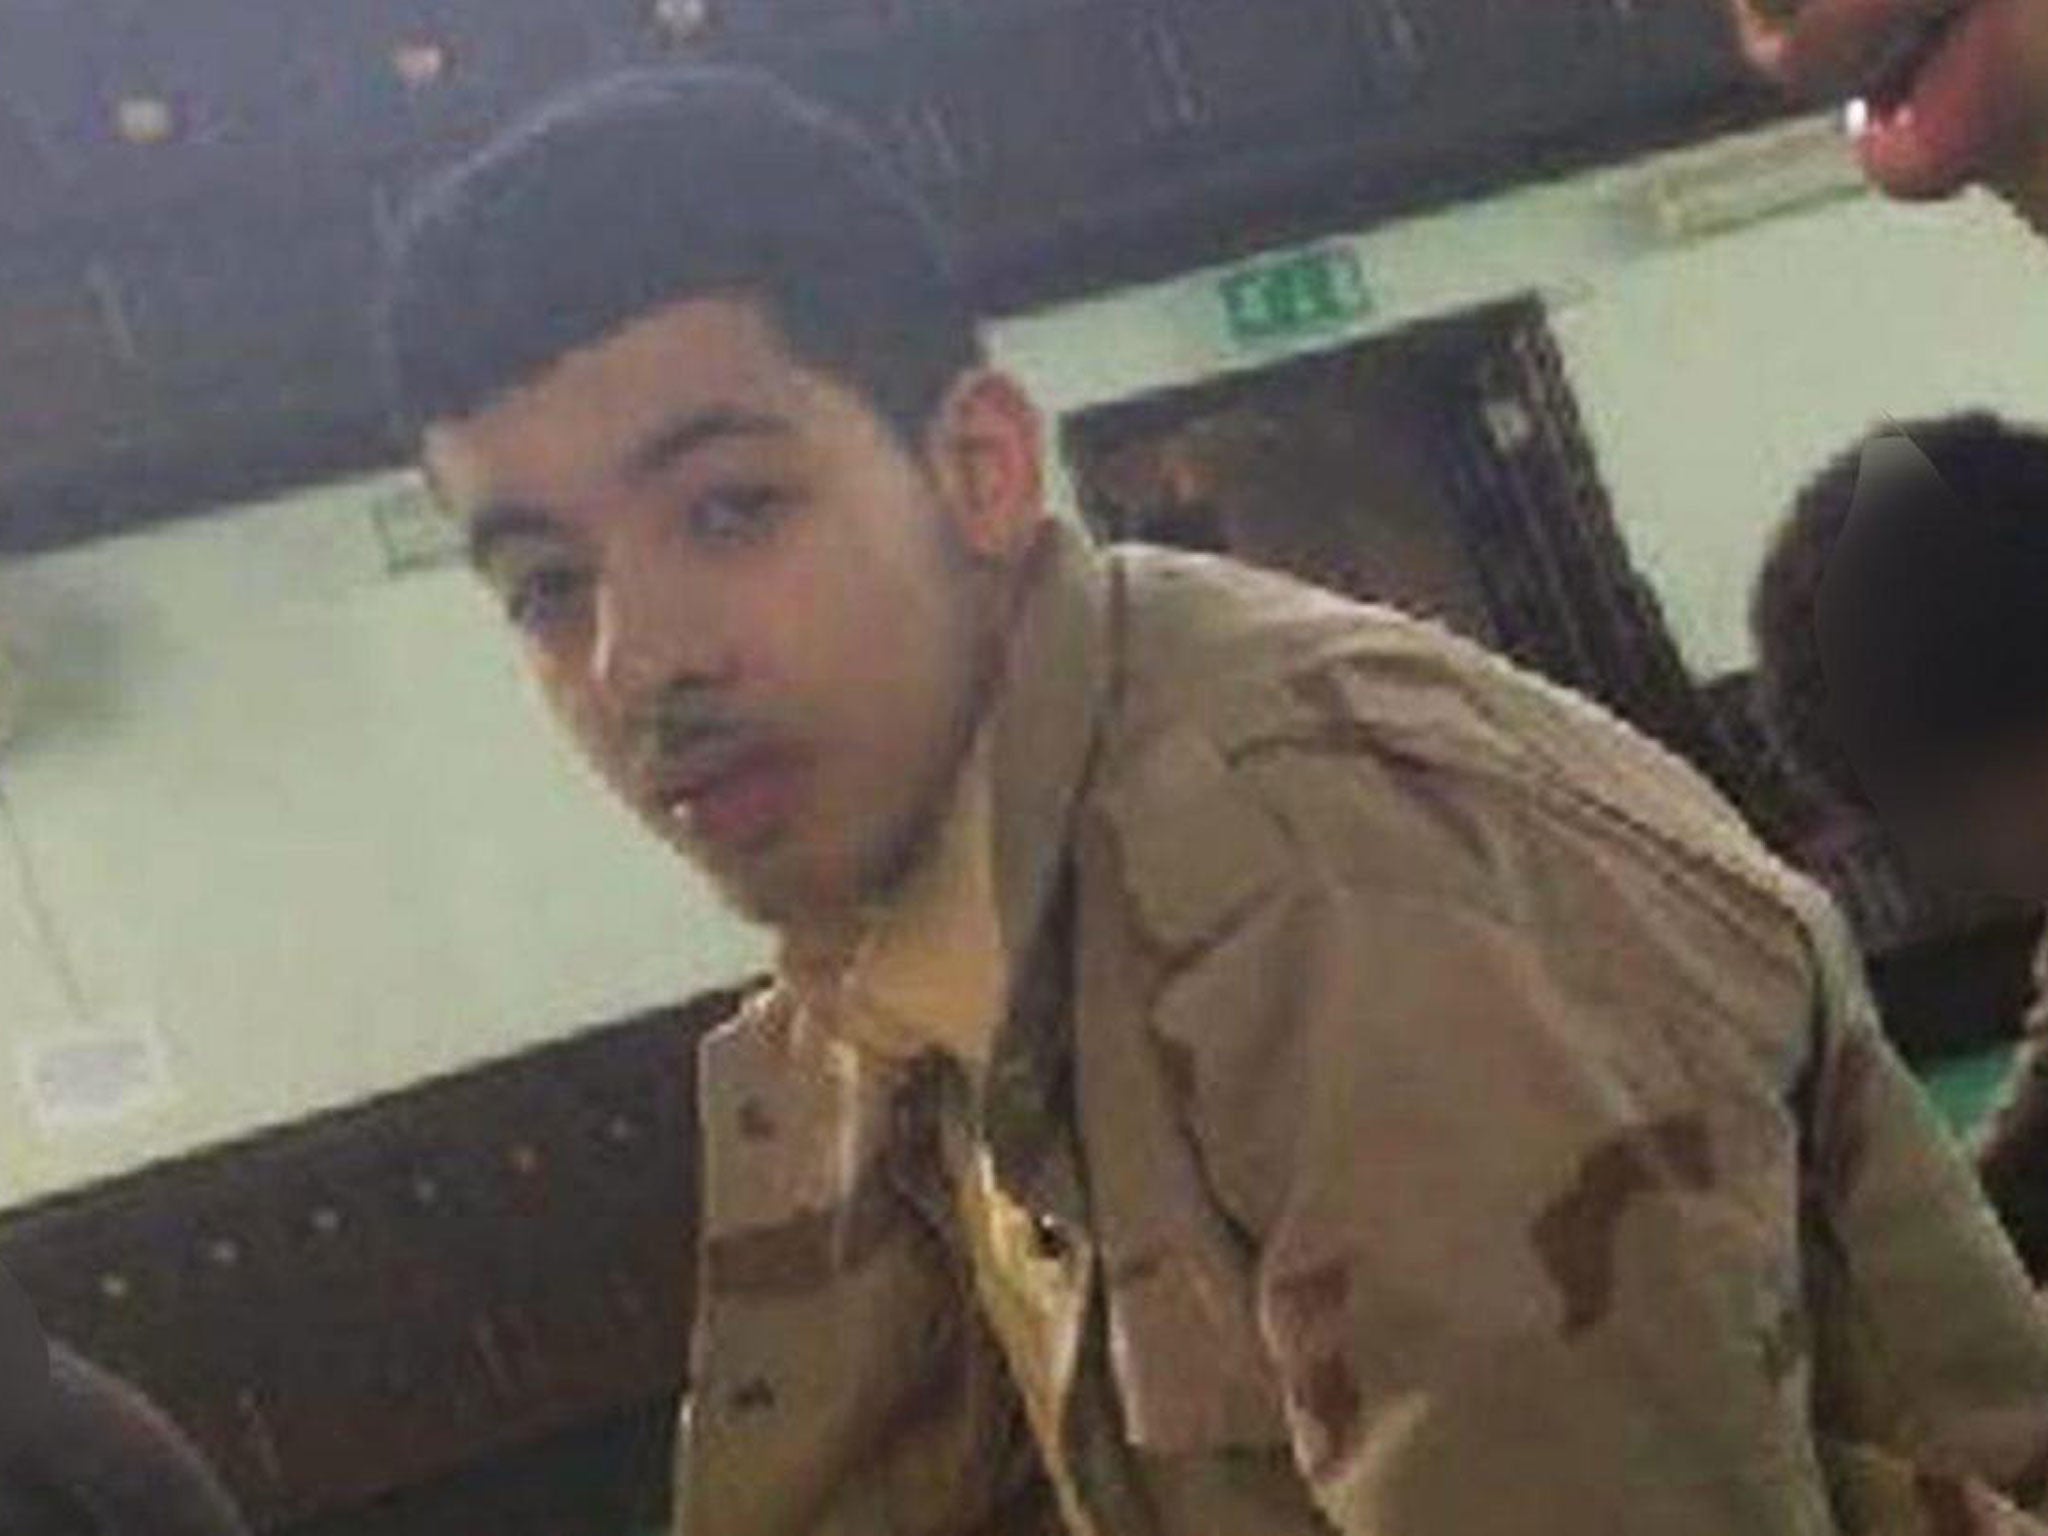 Salman Abedi, who is believed to have killed 22 people in an attack. His brother has been arrested in Libya